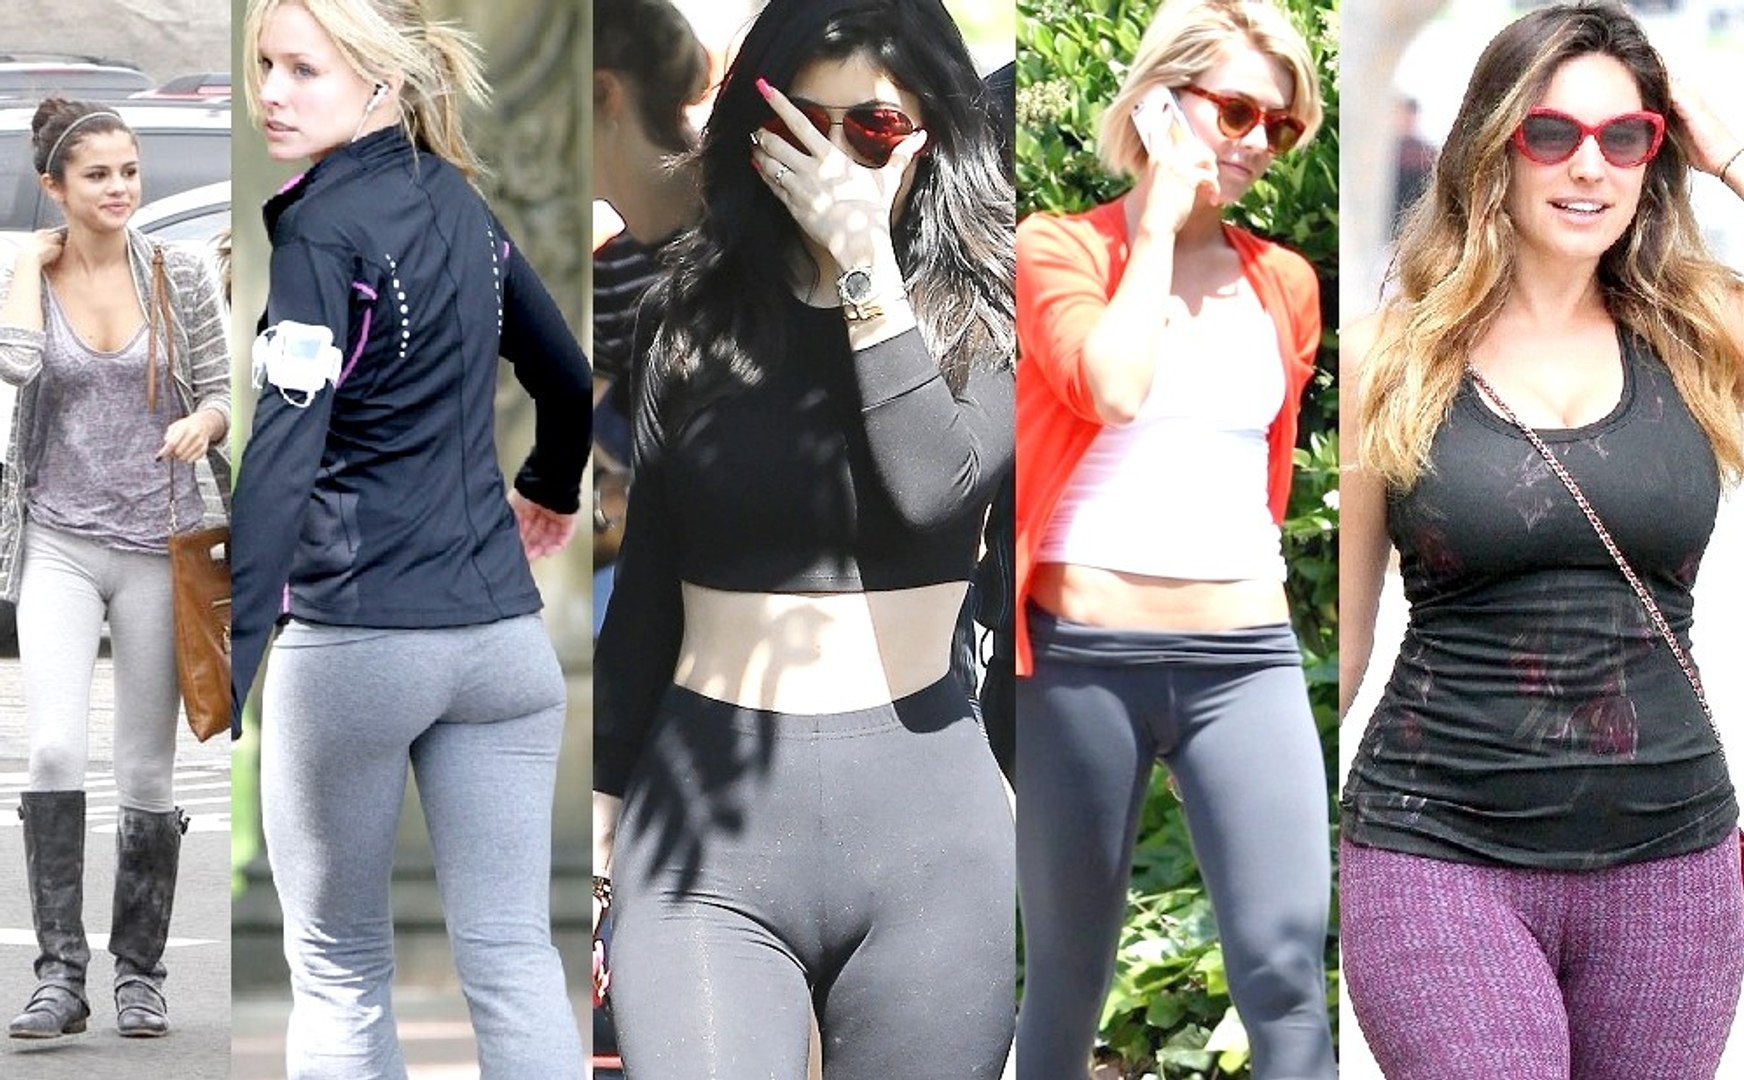 Celebrities Who Look Insanely Hot In Yoga Pants - Famous girls yoga pants &  Legging FAILS. - Vídeo Dailymotion